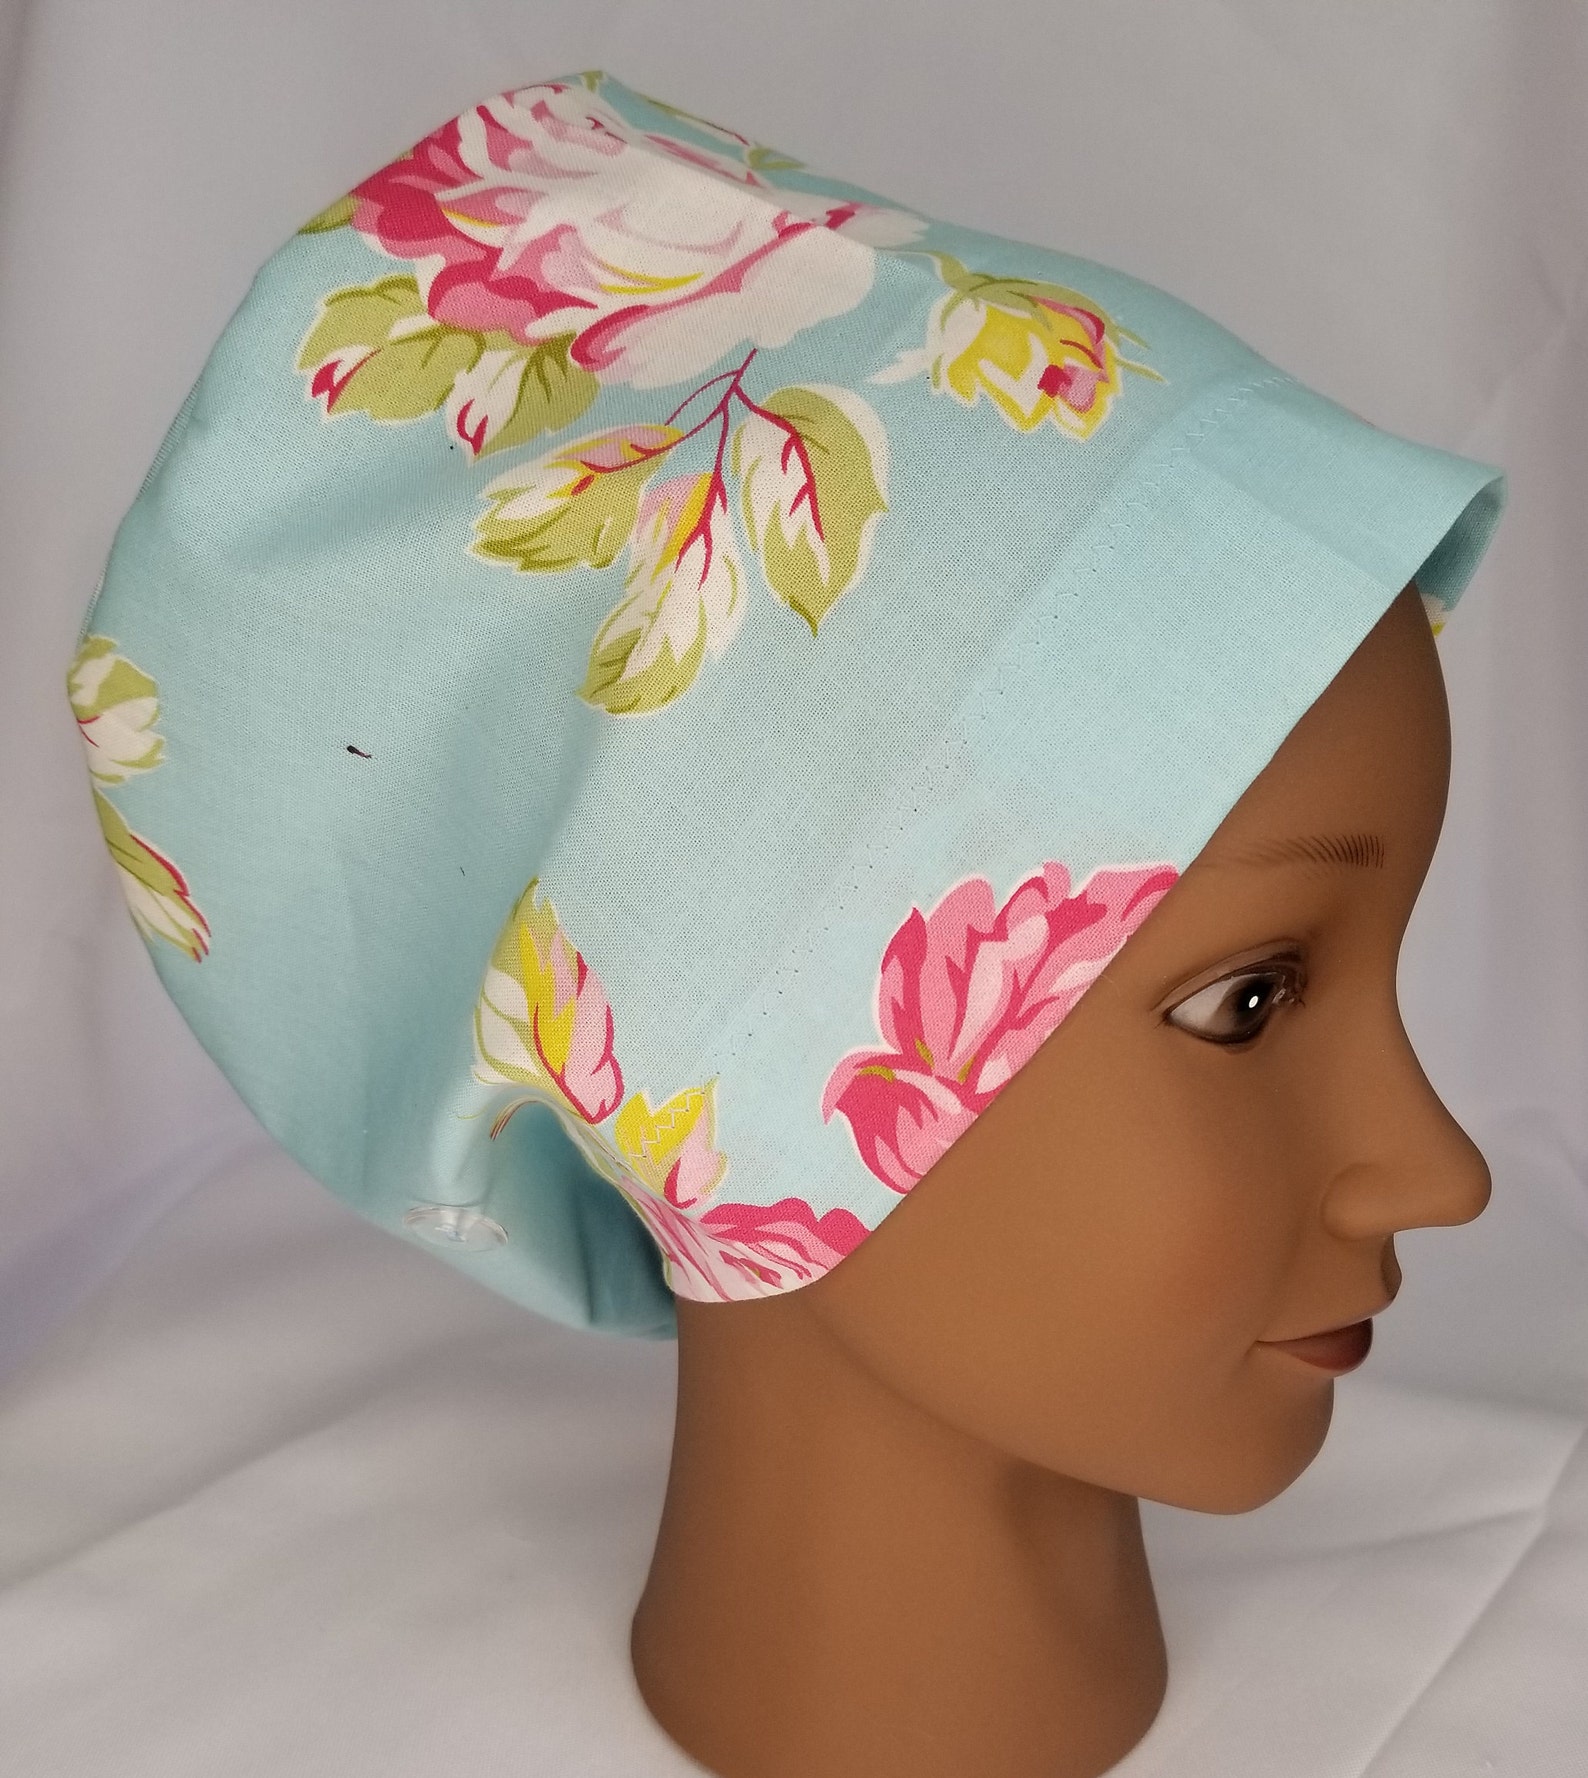 AVAILABLE SATIN LINED: This is a light blue floral bonnet with | Etsy